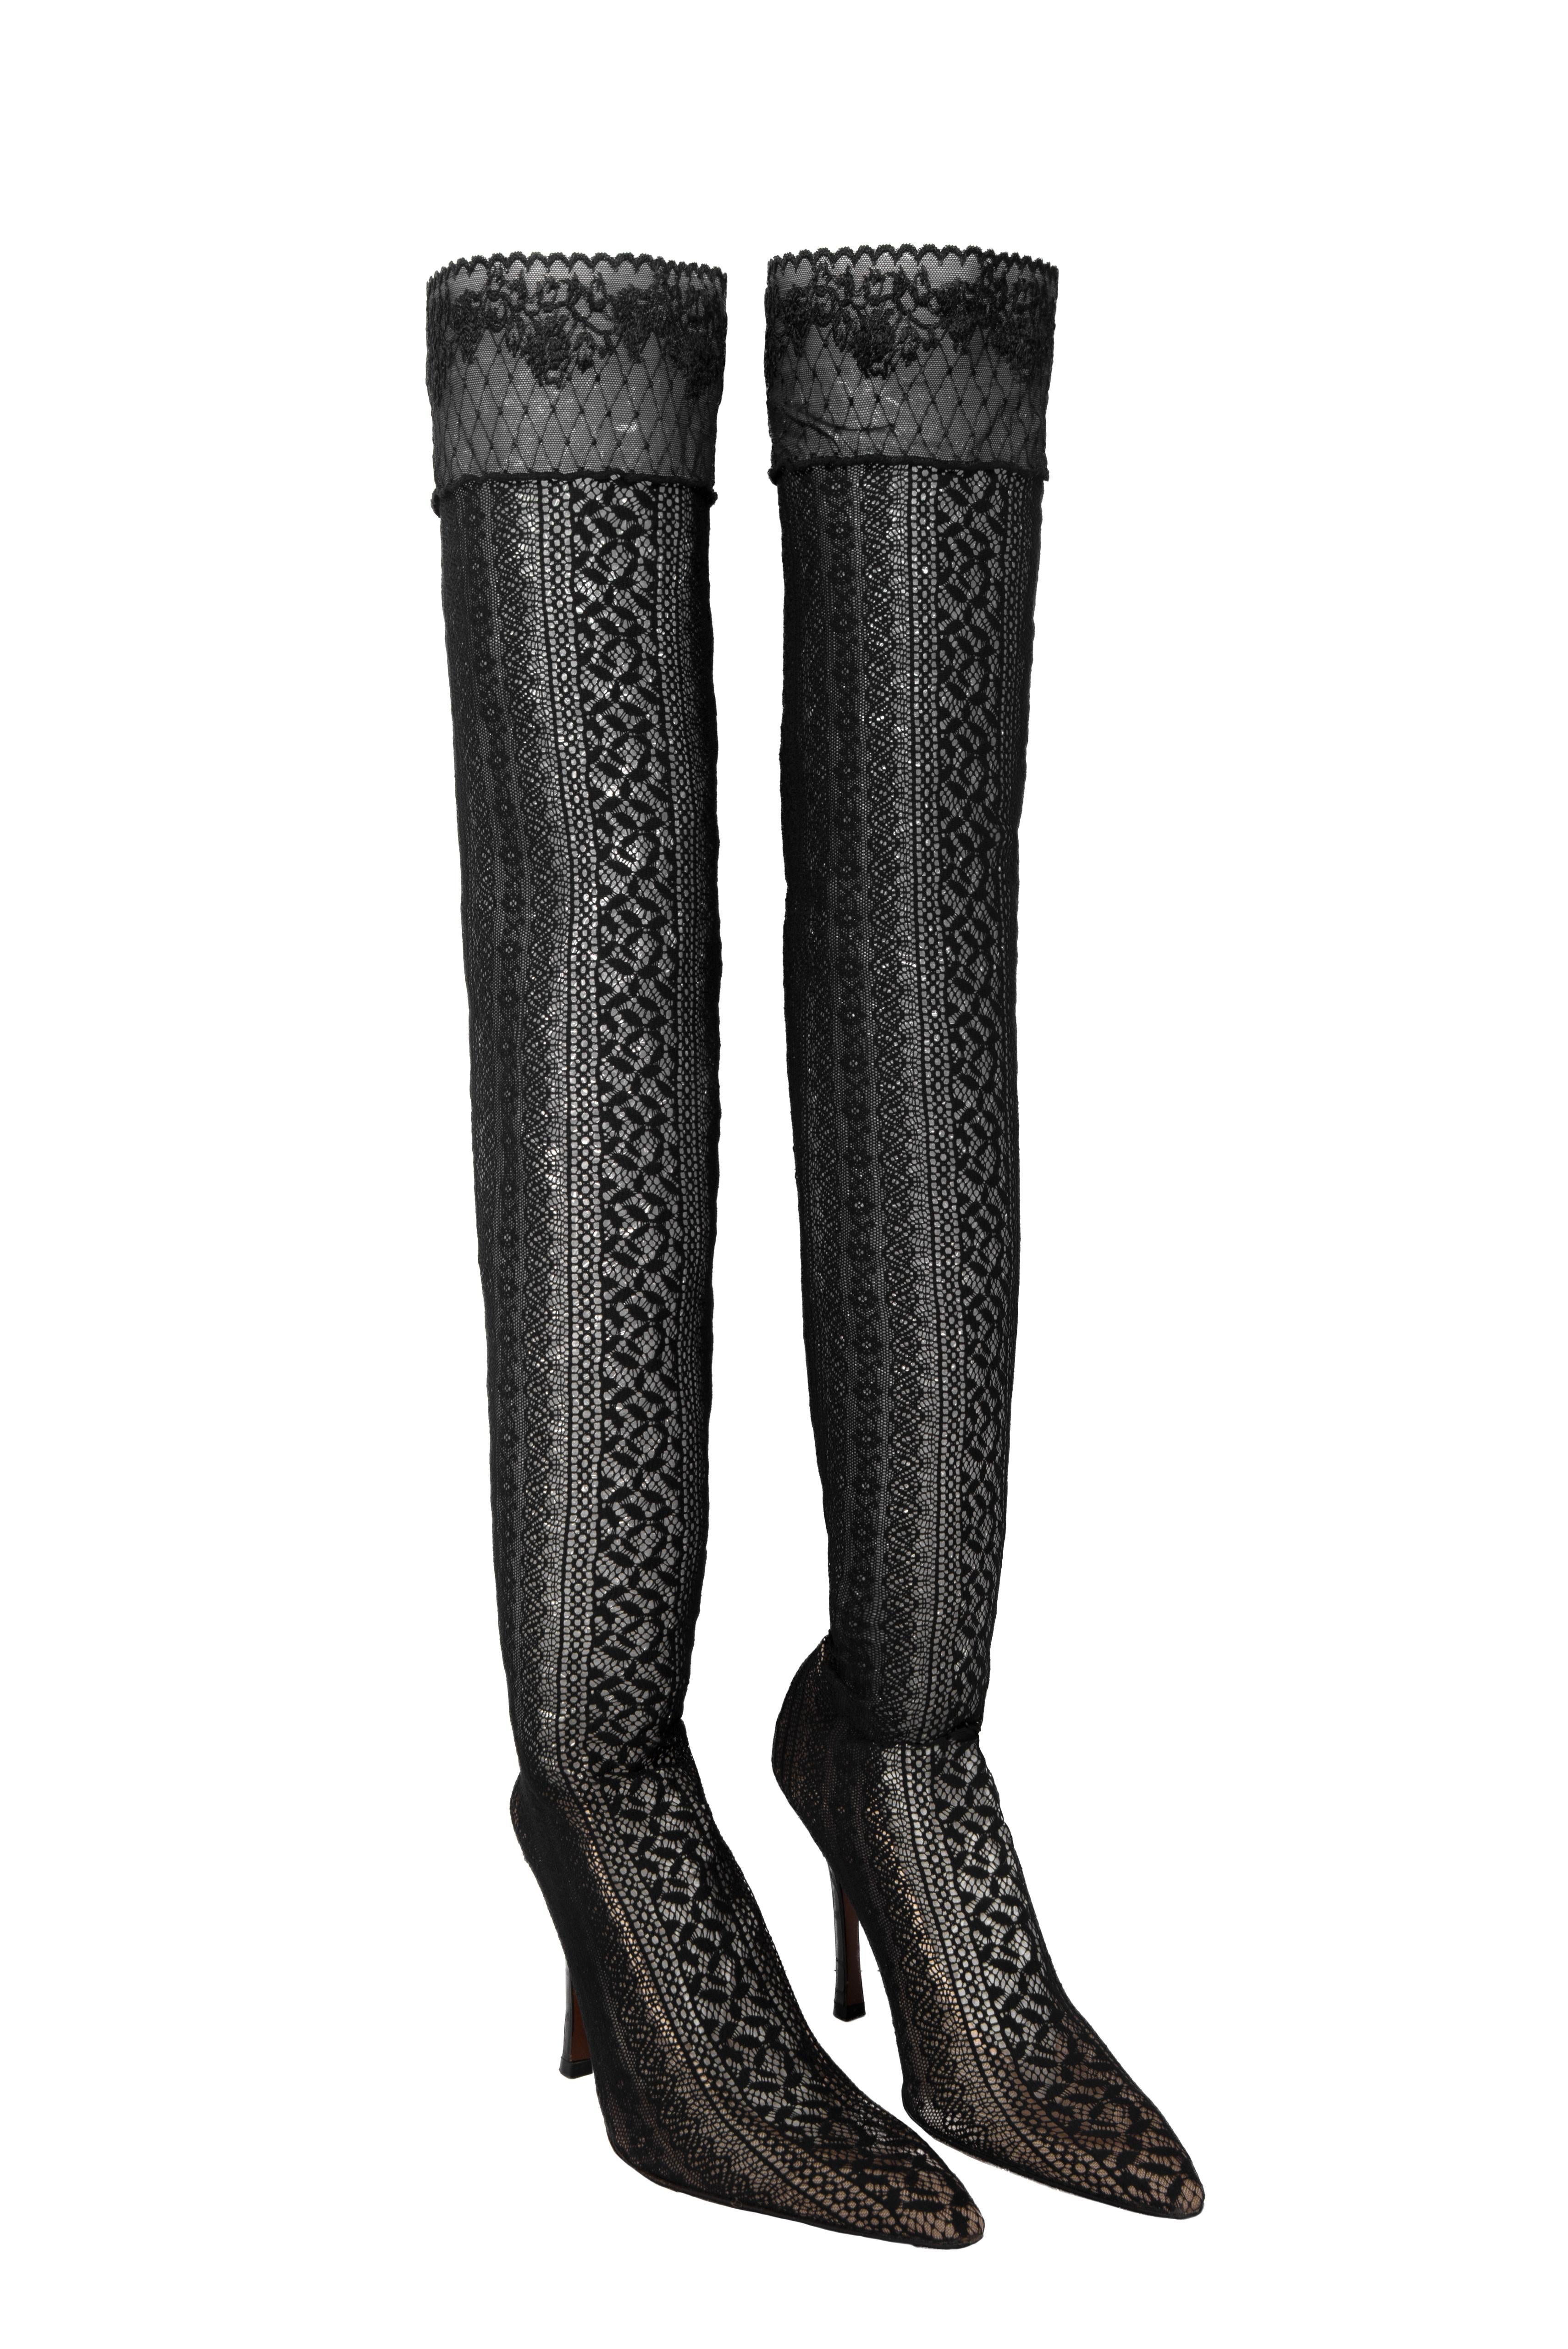 S/S 1998 John Galliano for CHRISTIAN DIOR Black Thigh-High Lace Stocking Boots In Excellent Condition In Munich, DE